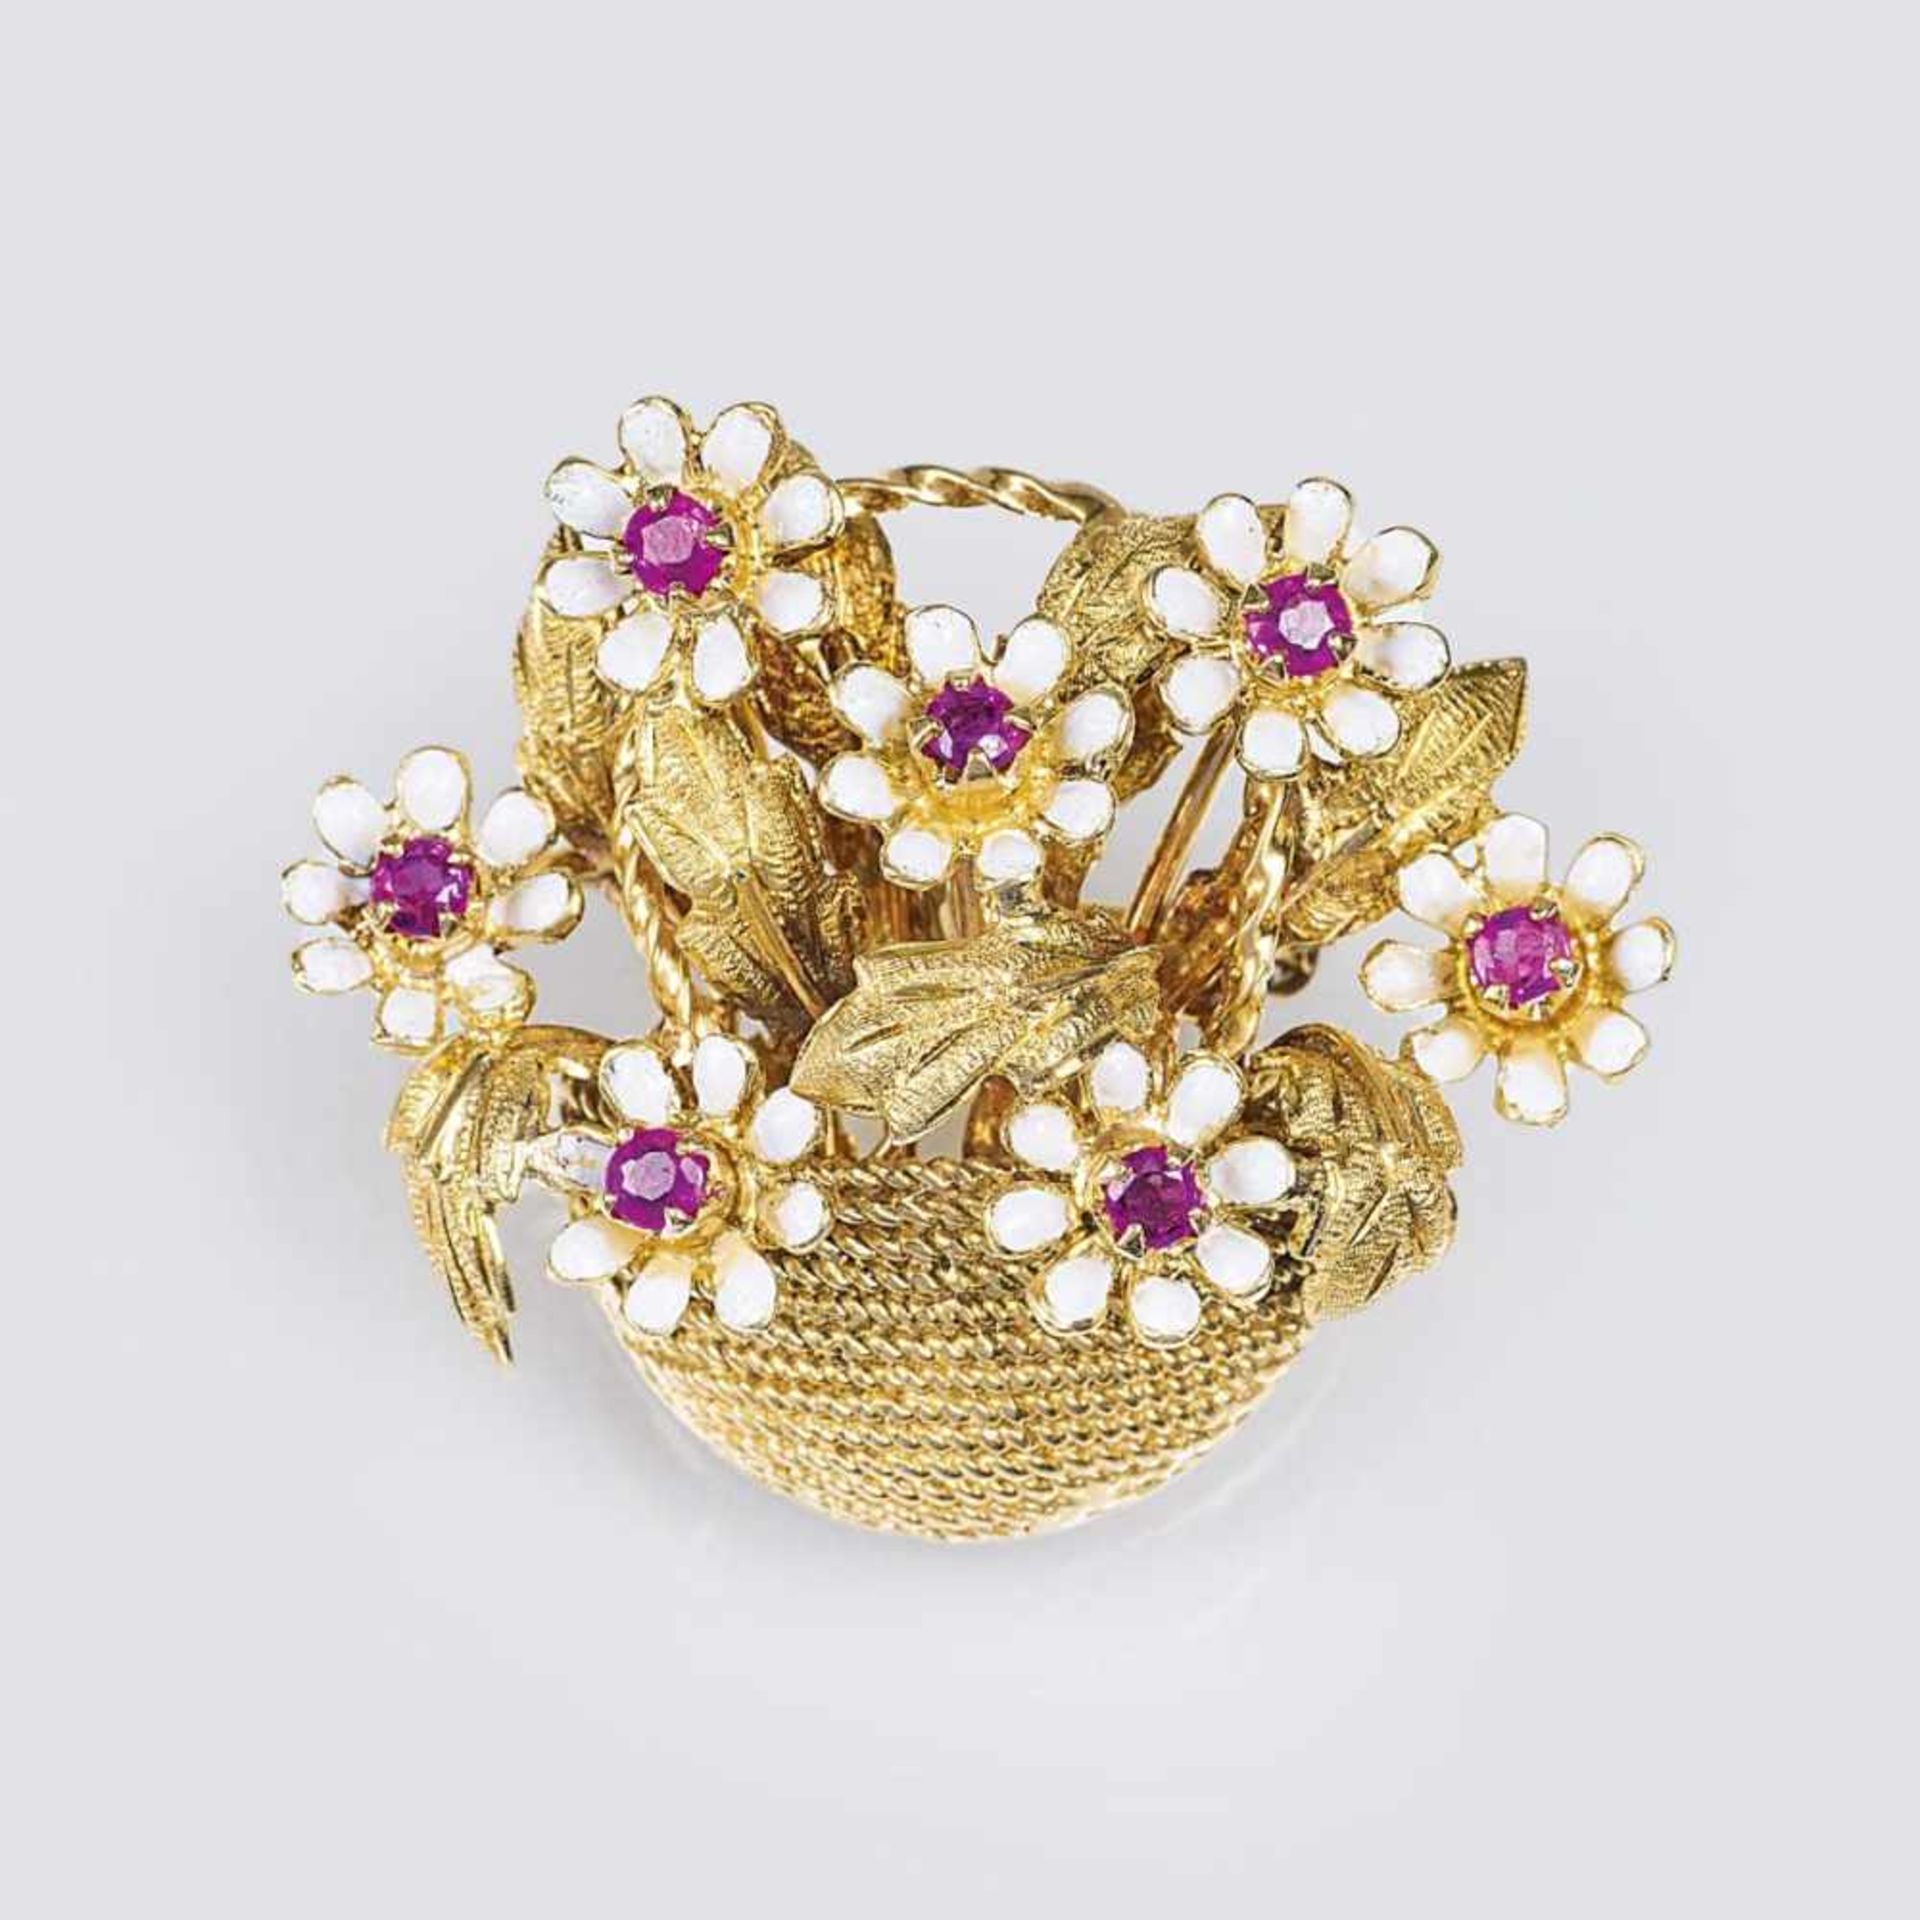 A Vintage Gold Brooch 'Flower Basket'Mid 20th cent. 18 ct. yellow gold, marked. MZ: 'V', 'Italy'.